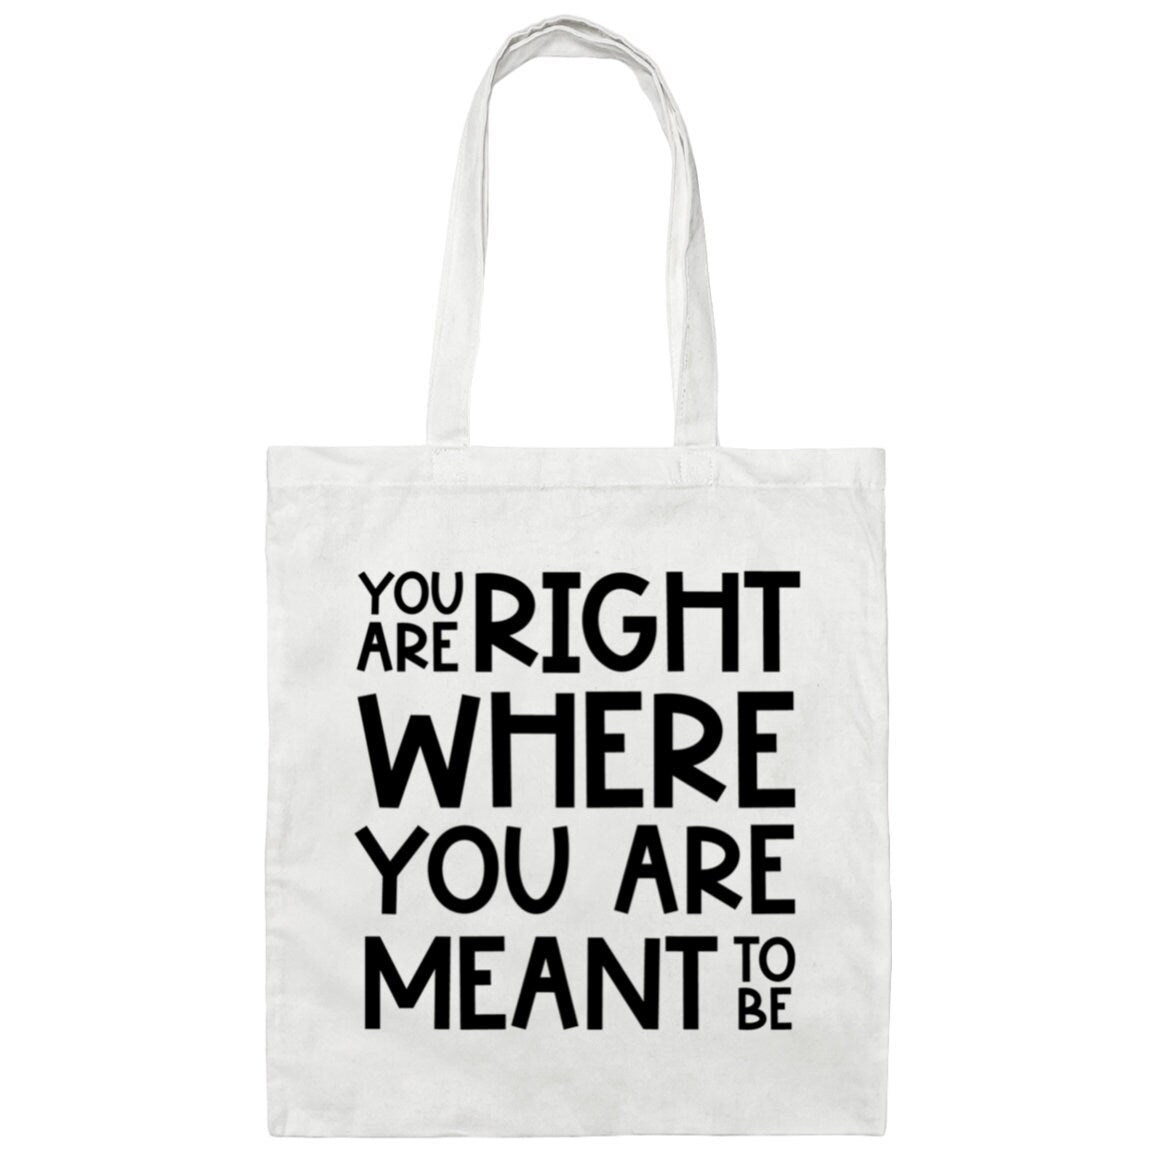 You Are Right Where You Are Meant To Be Tote Bag